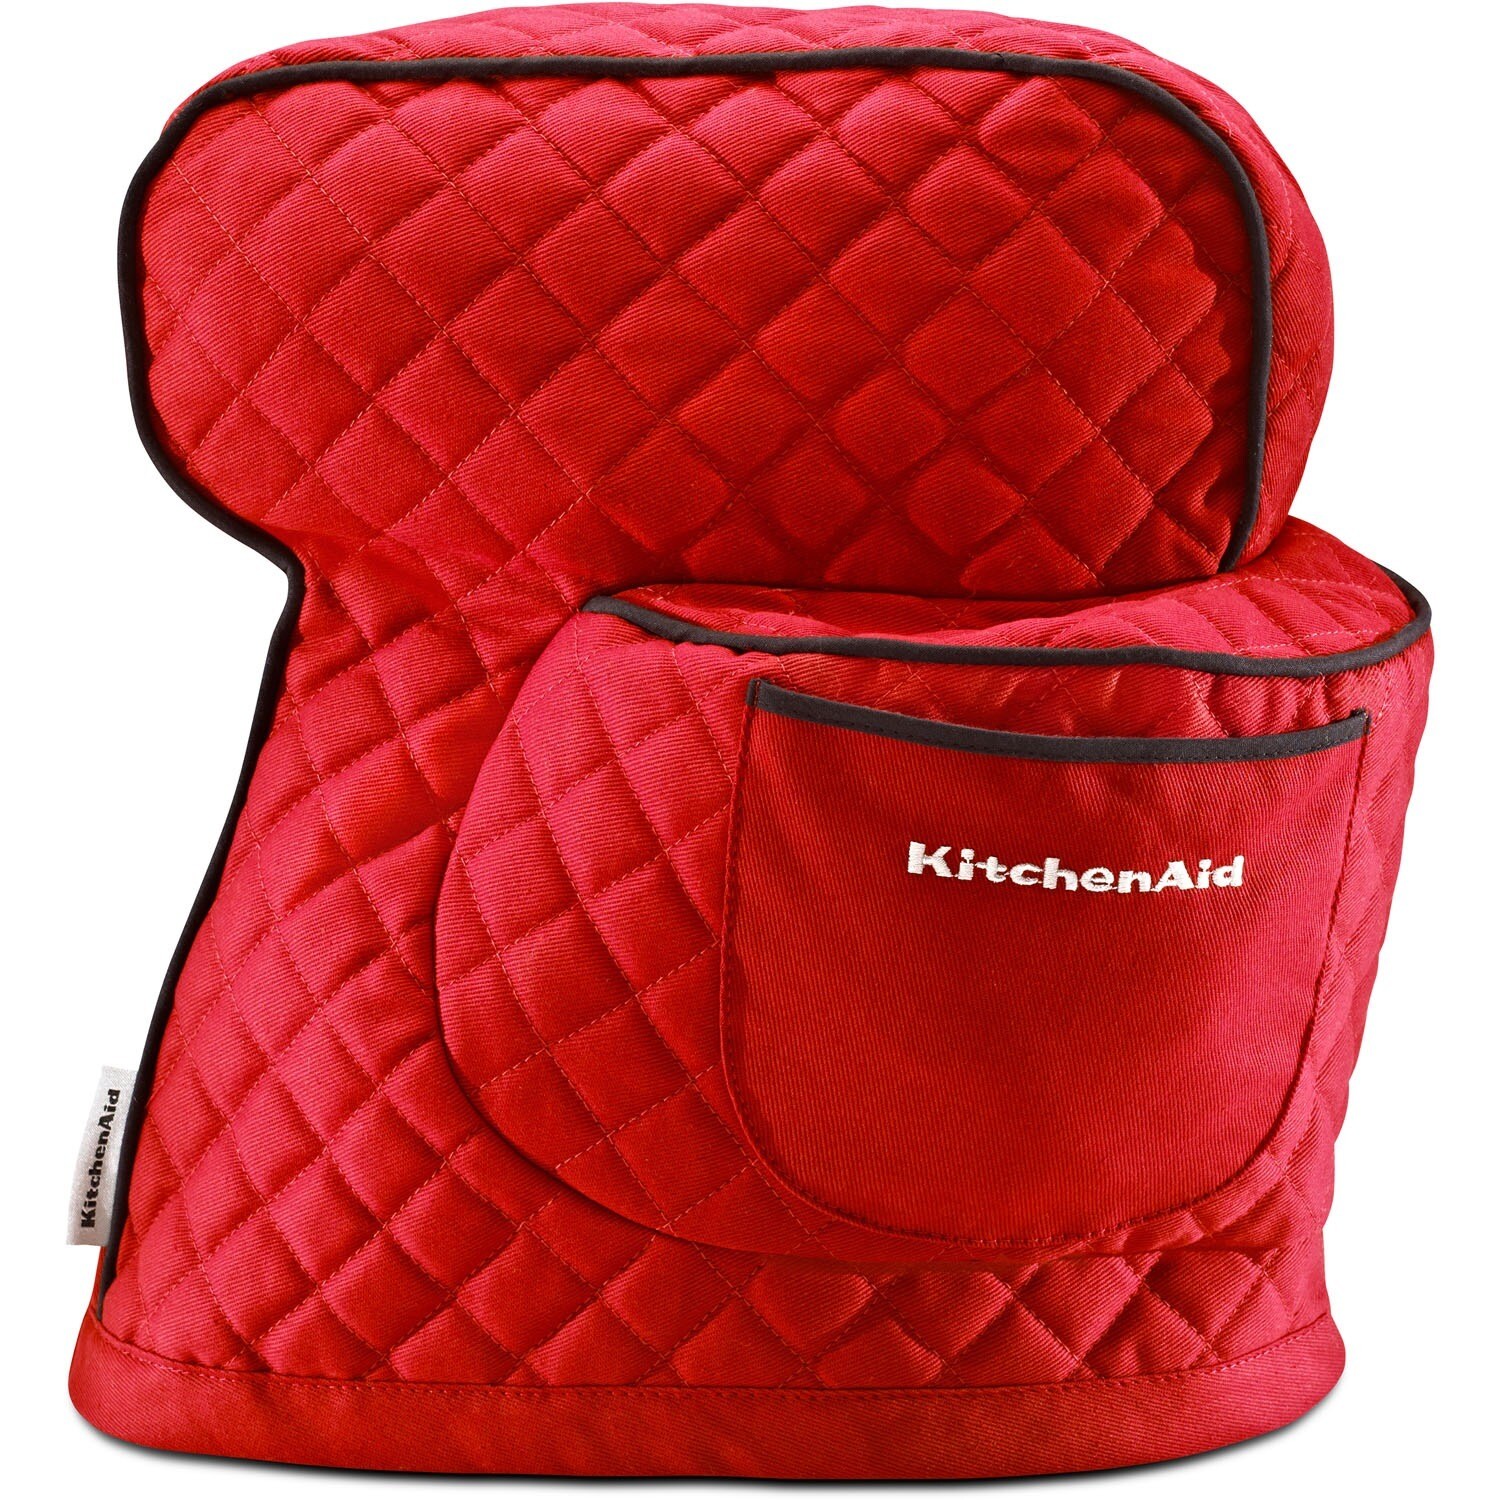 KitchenAid Quilted Cotton Tilt-head Stand Mixer Cover - Bed Bath & Beyond -  8778240